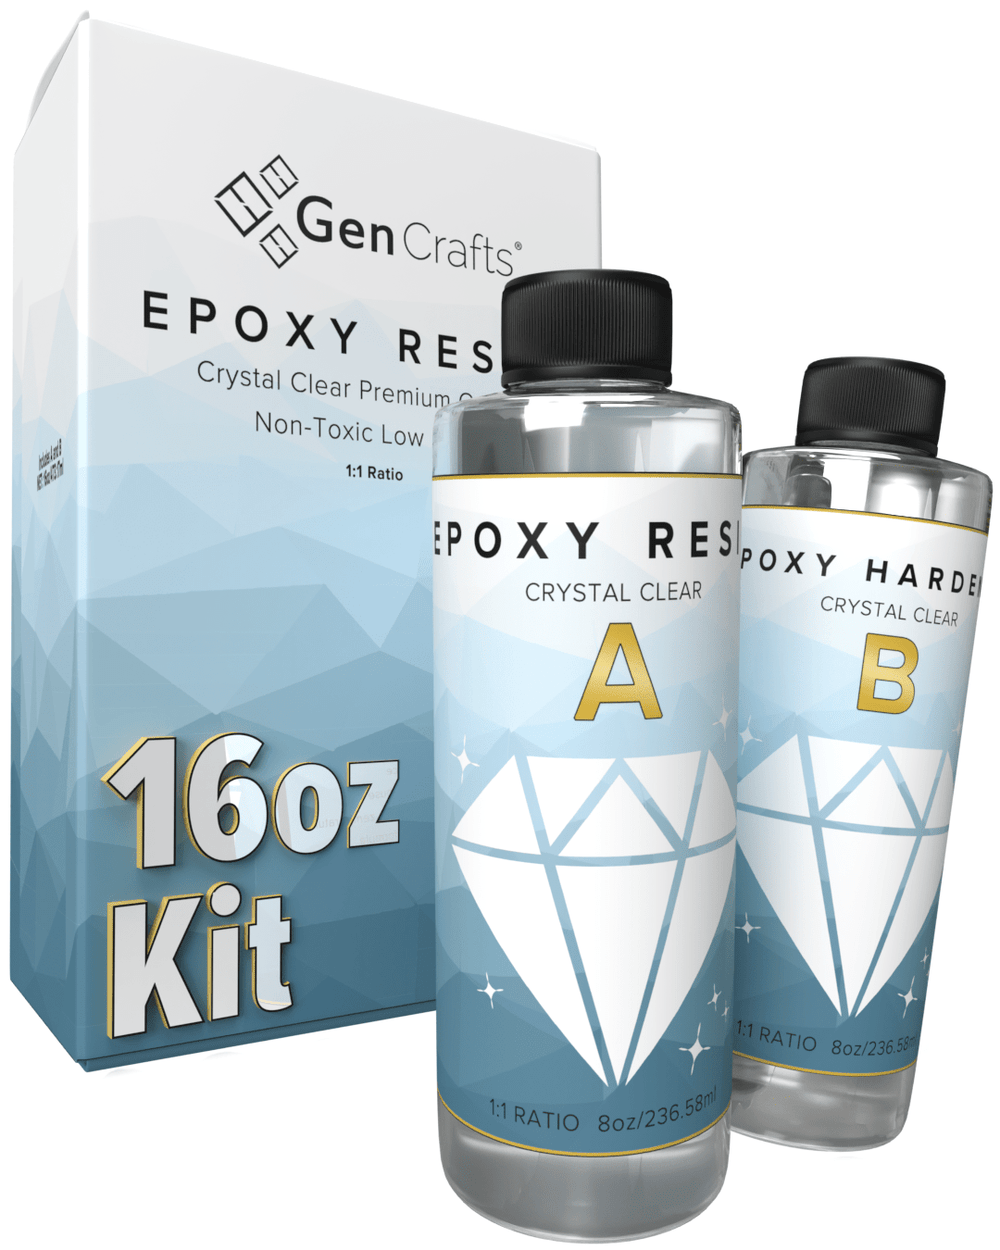 GenCrafts Epoxy Resin Kit - Crystal Clear and Perfect for Silicone Molds, Jewelry Art, Coating, Tumblers, and More - for use with Additives Like Glitter, Mica Powder, and Liquid Pigment